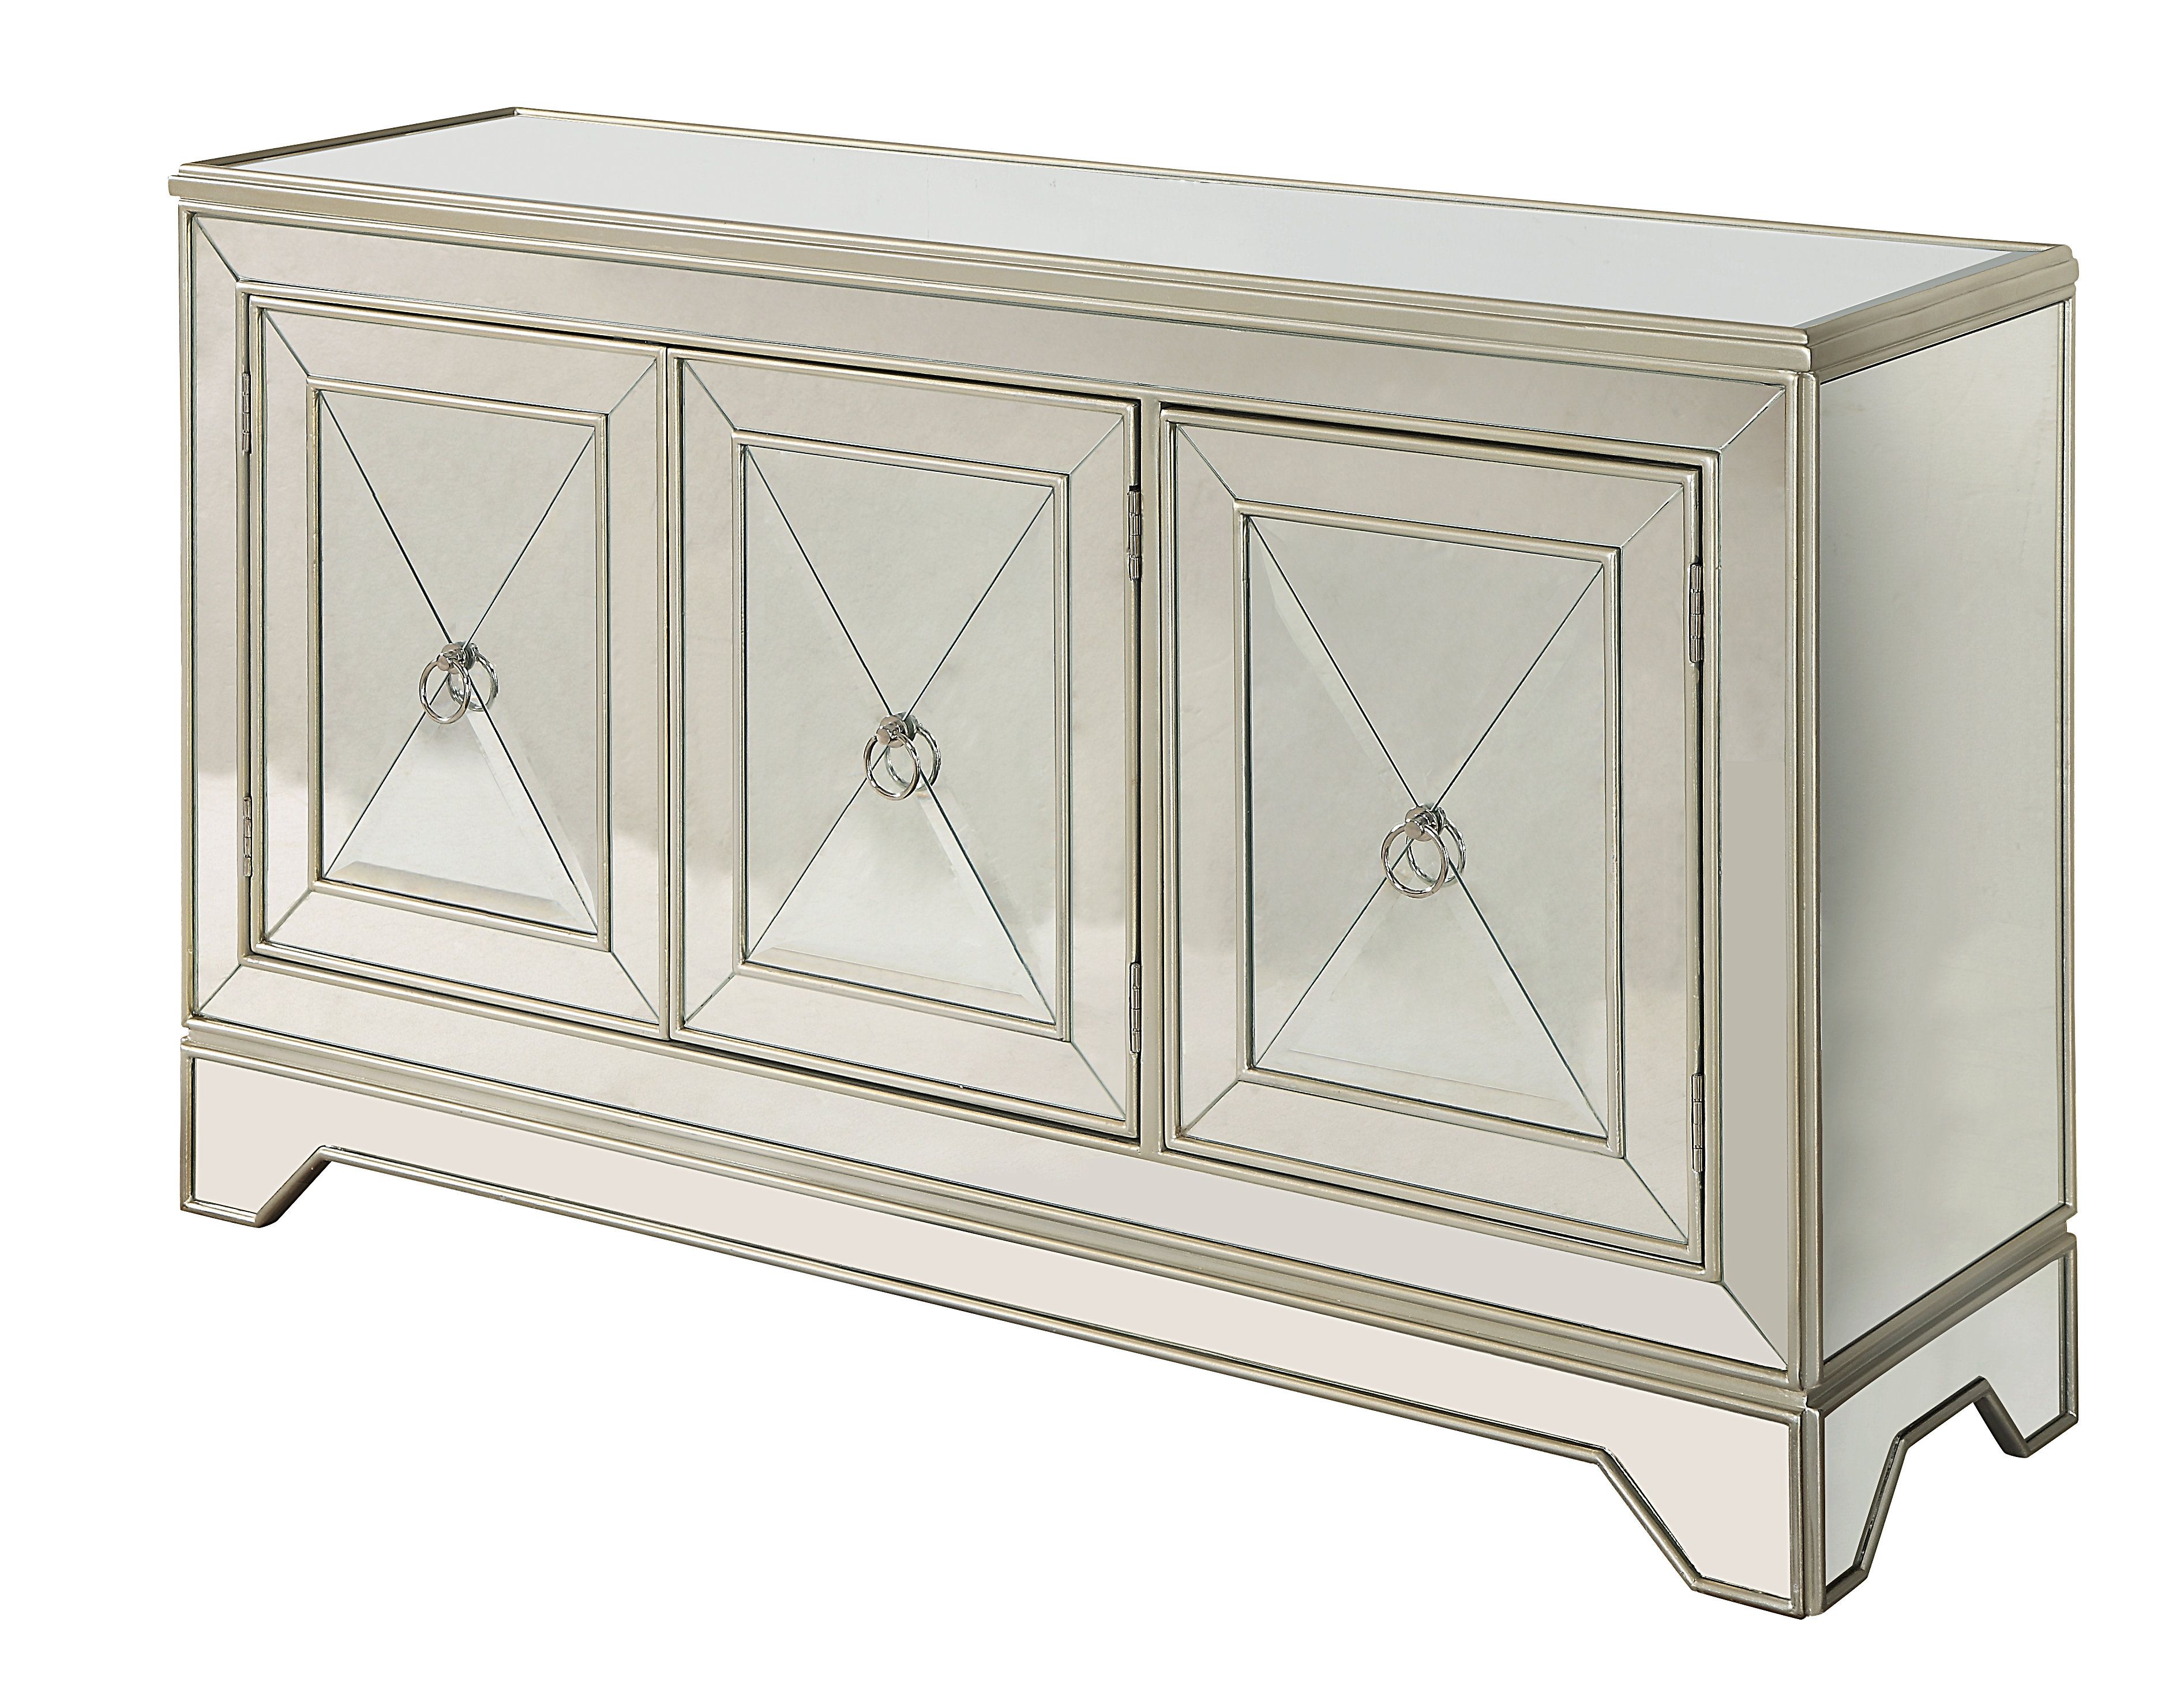 Sideboard / Credenza Mirrored Sideboards | Joss & Main With Regard To Recent Aberdeen Westin Sideboards (View 20 of 20)